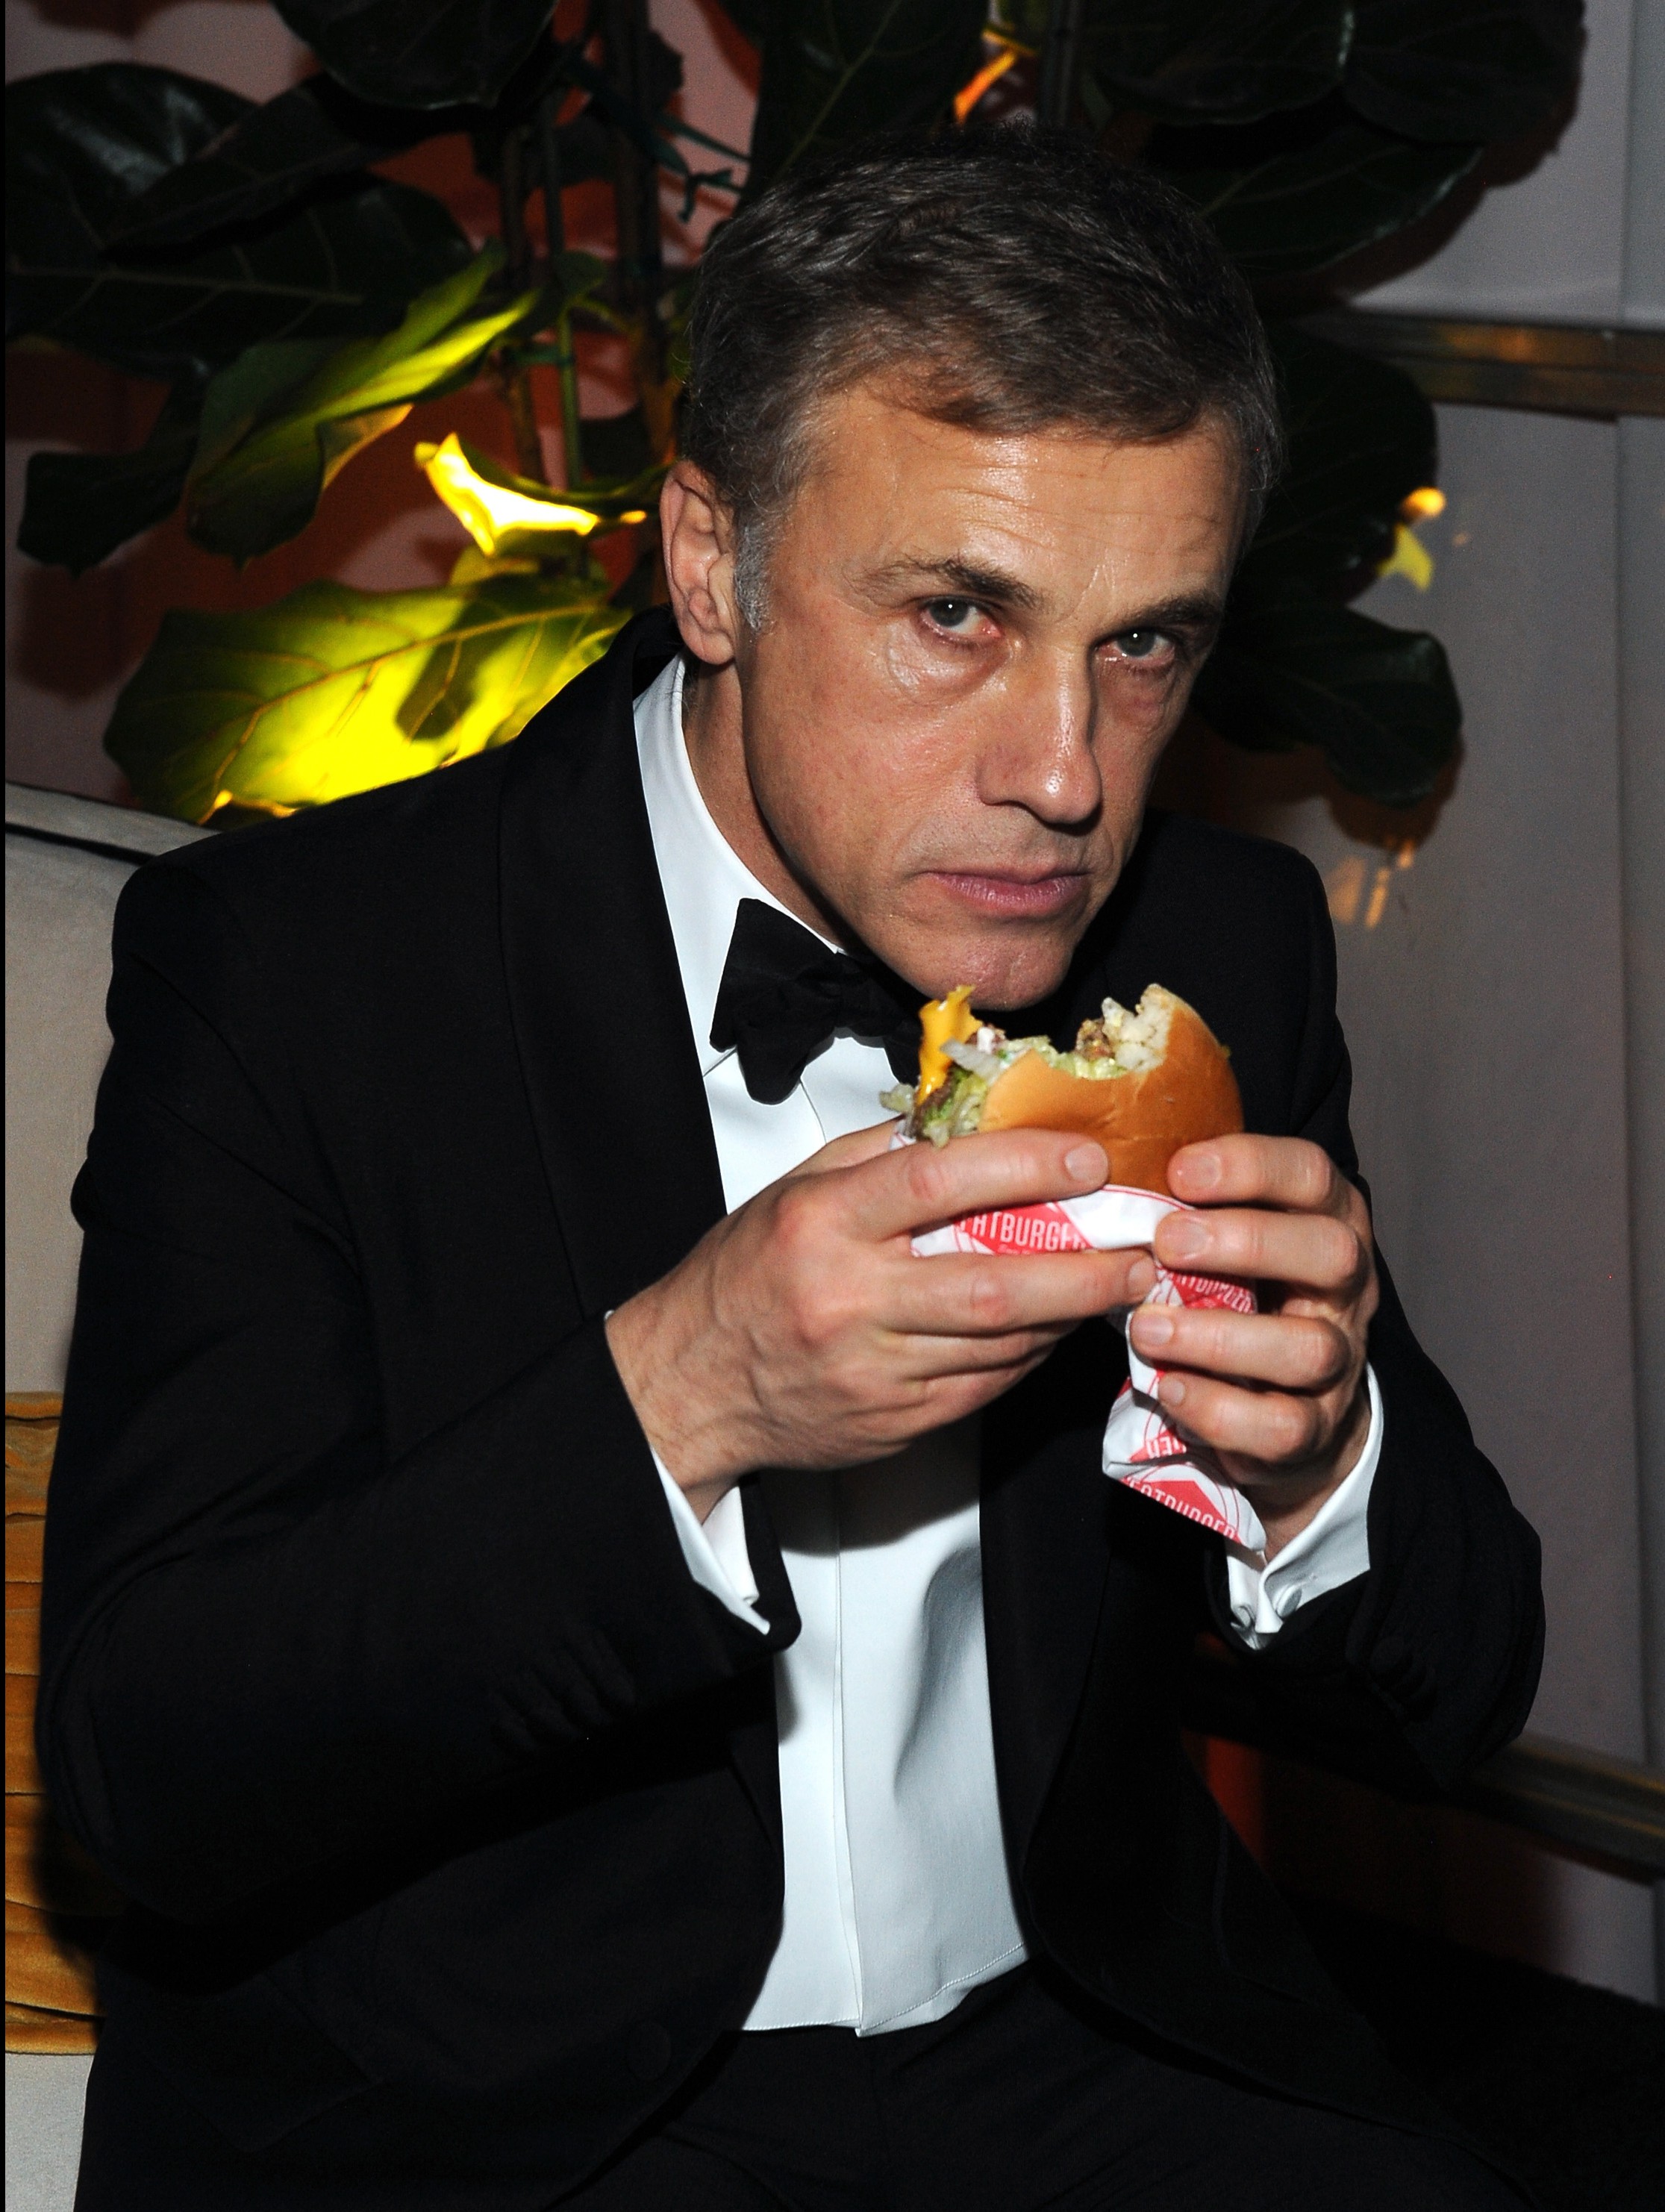 Christoph Waltz Wallpaper For Iphone Download - Christoph Waltz Eating Burger , HD Wallpaper & Backgrounds